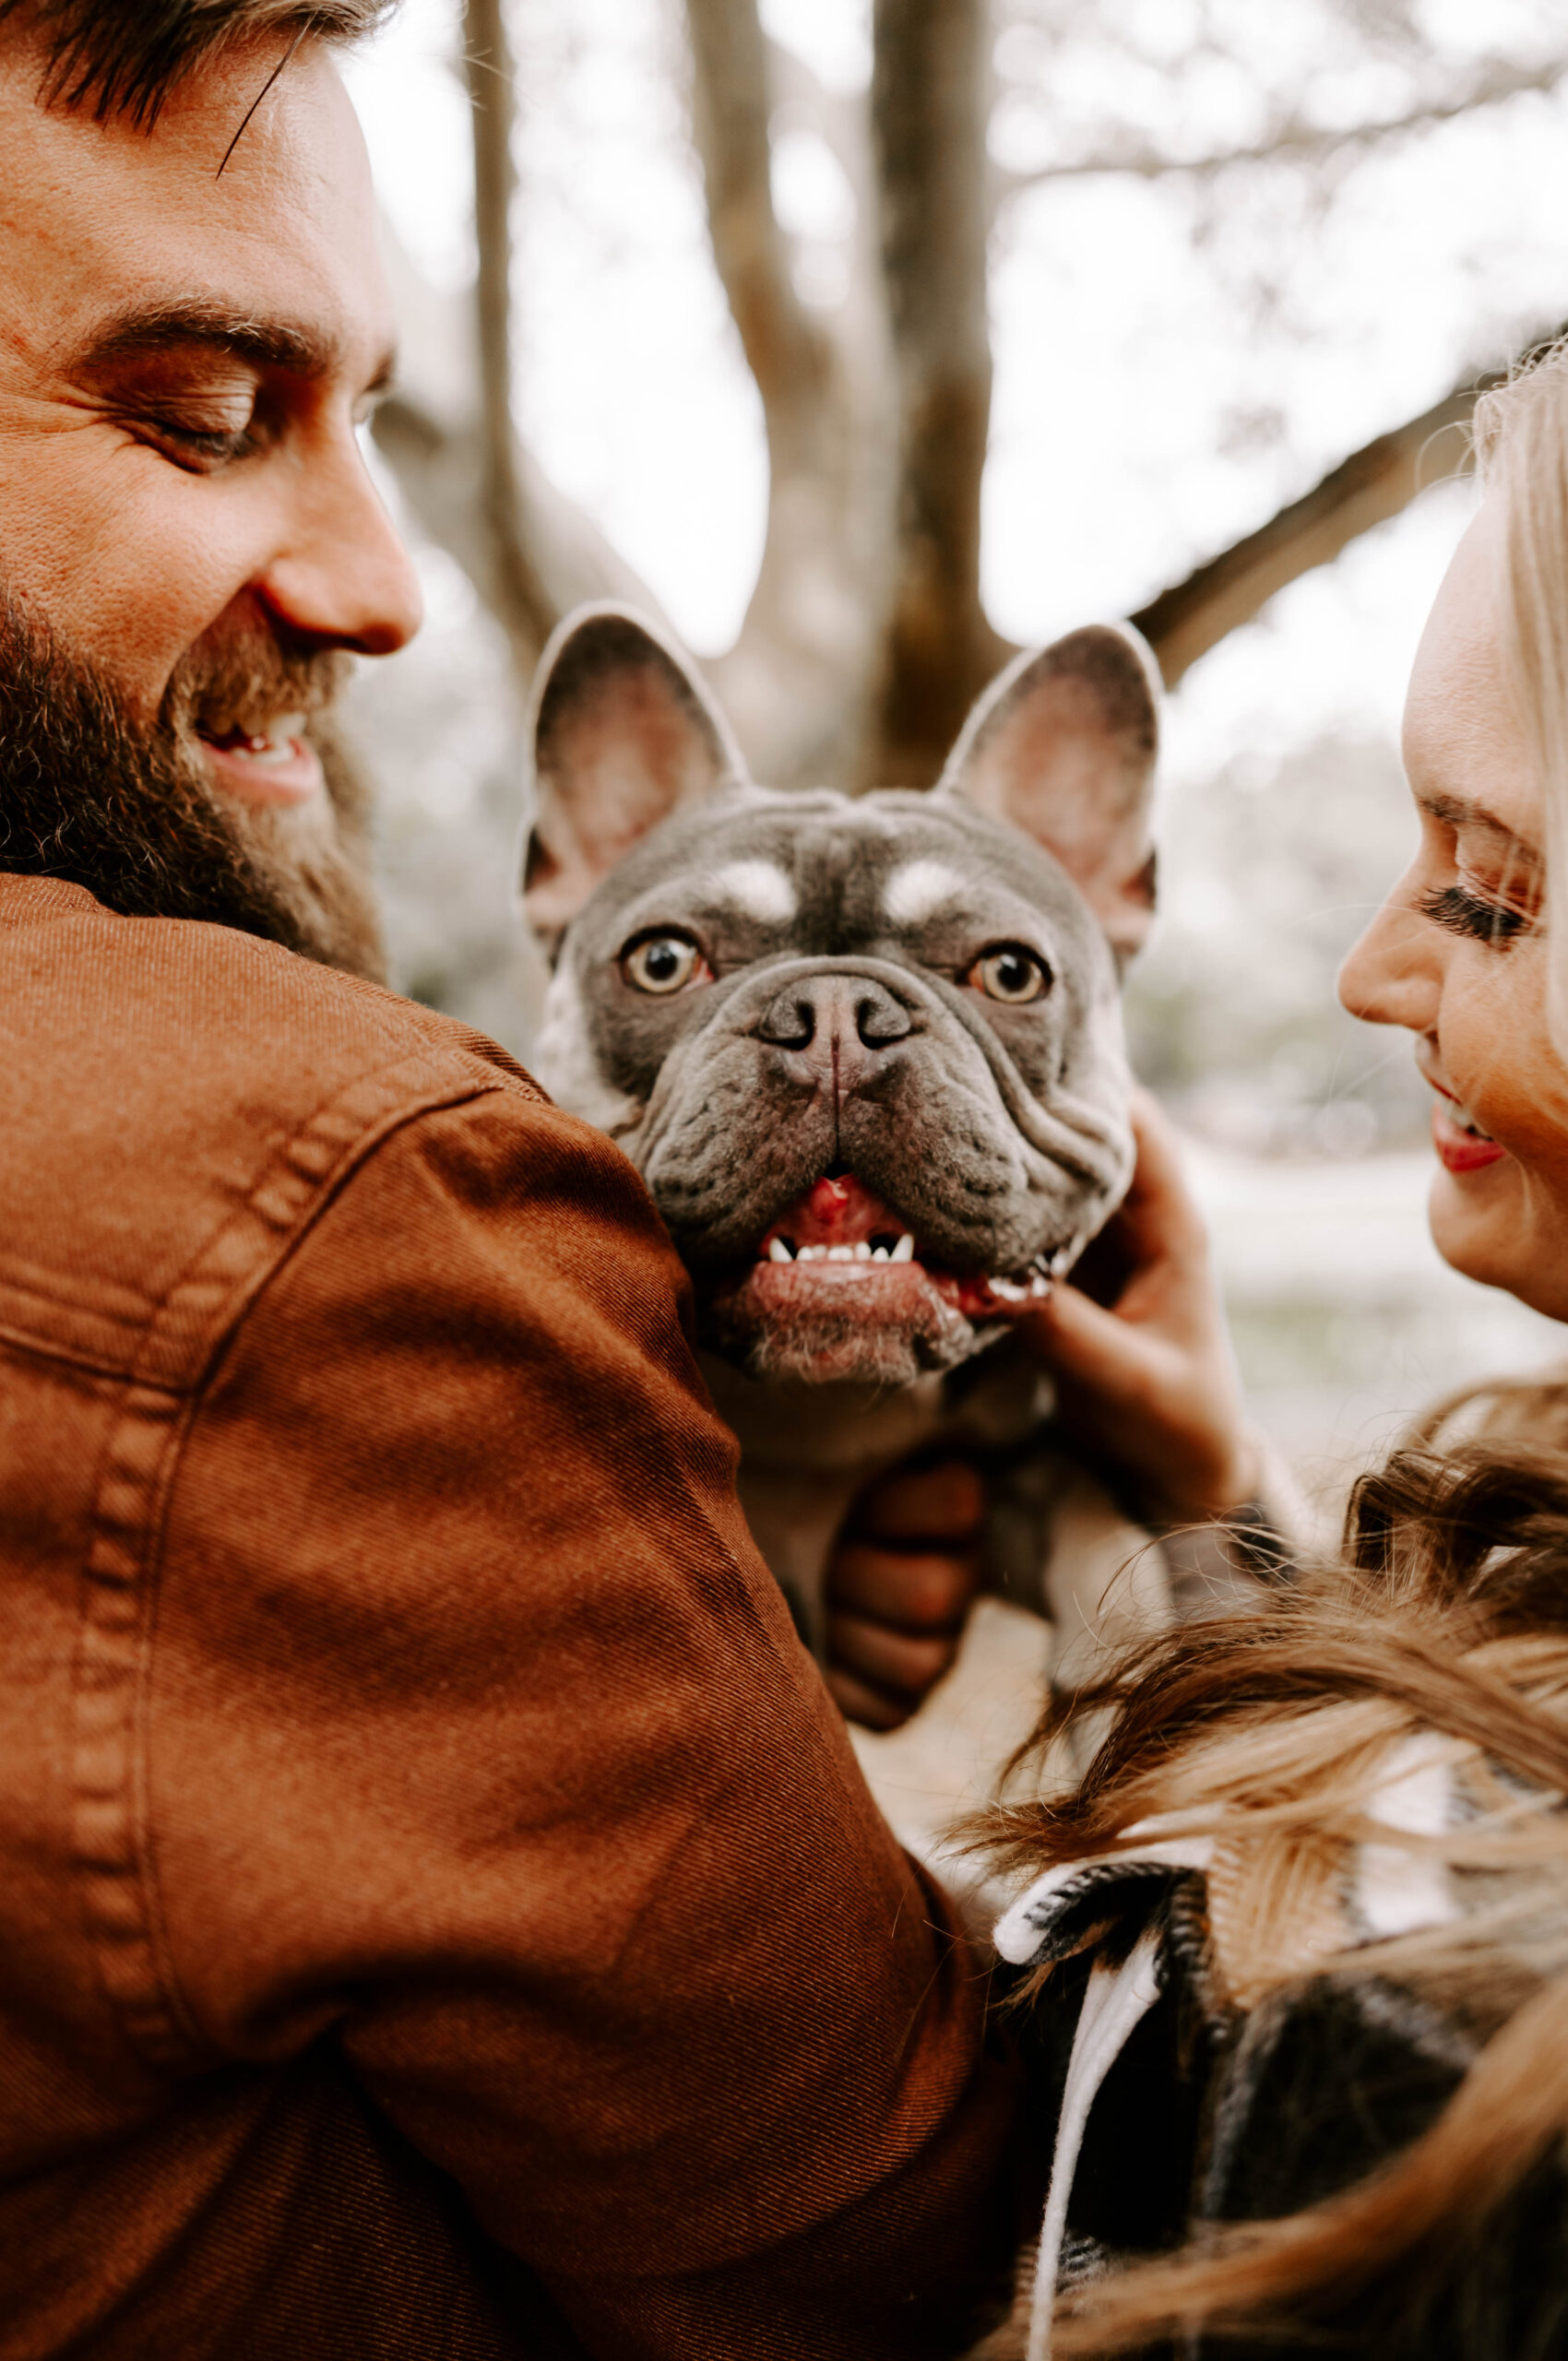 engagement photos with your dog at Allegheny Commons Park